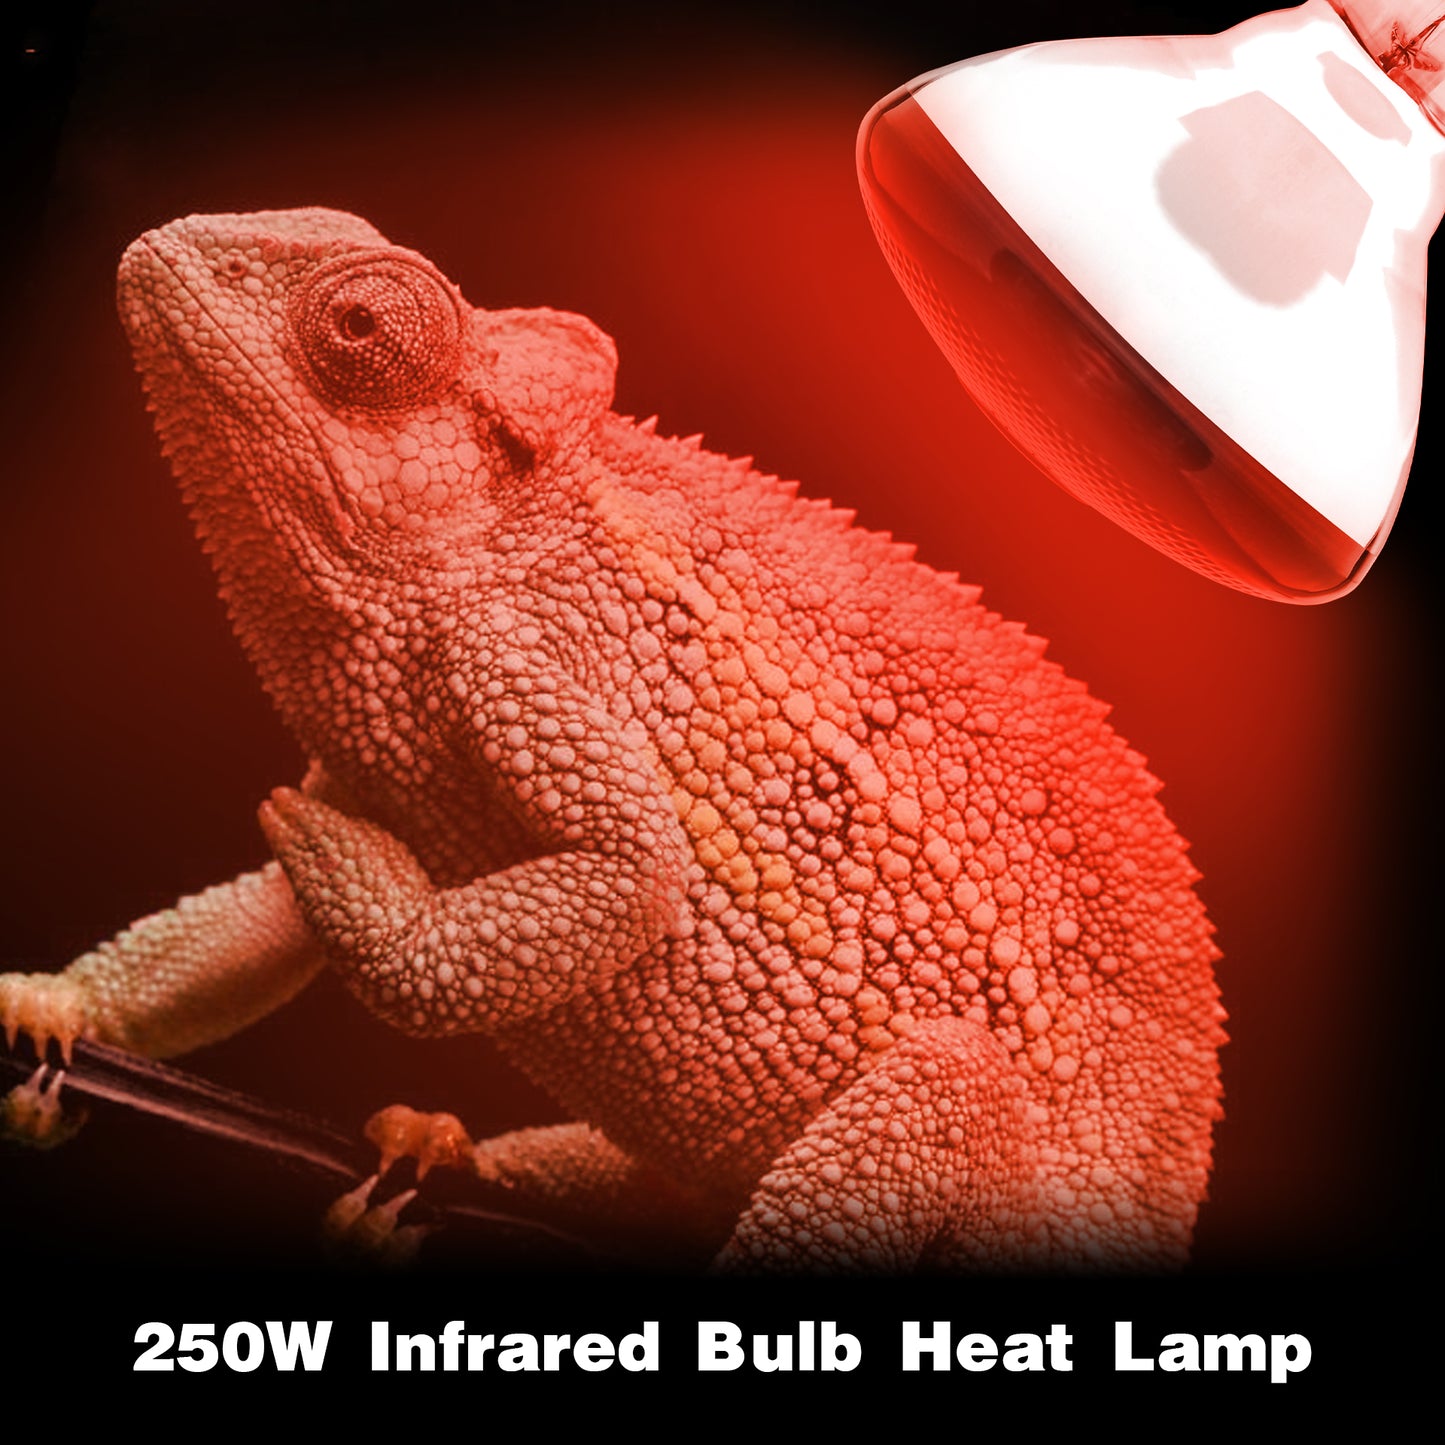 COOSPIDER Heat Lamp Red Infrared Light Bulbs PAR38 250 Watts Fits E26 E27 Base 250W As Chickens Brooder Heat Light for Multi-Application Scenario(250W)